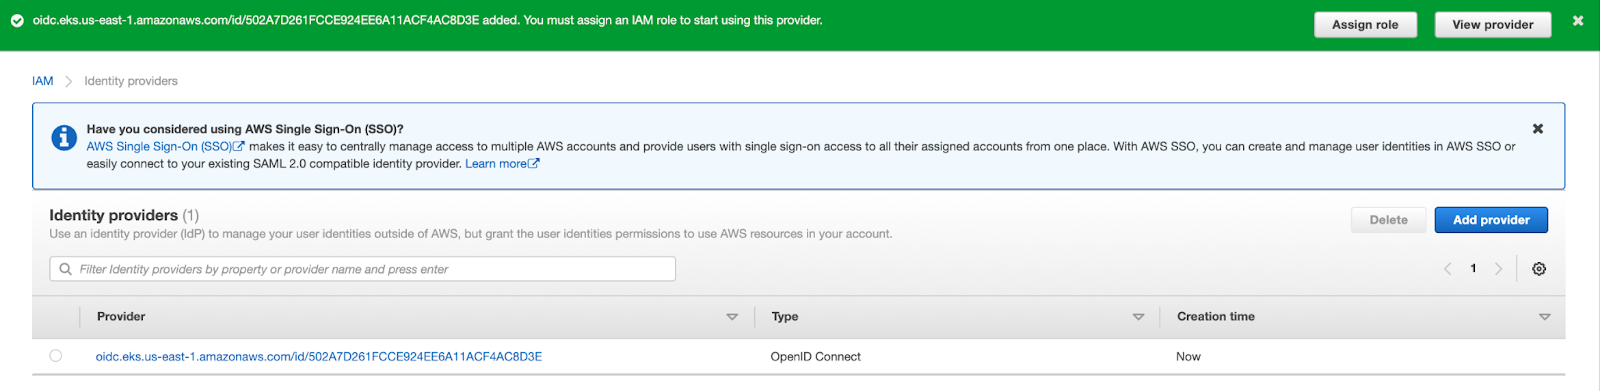 Identity provider information in the AWS Console